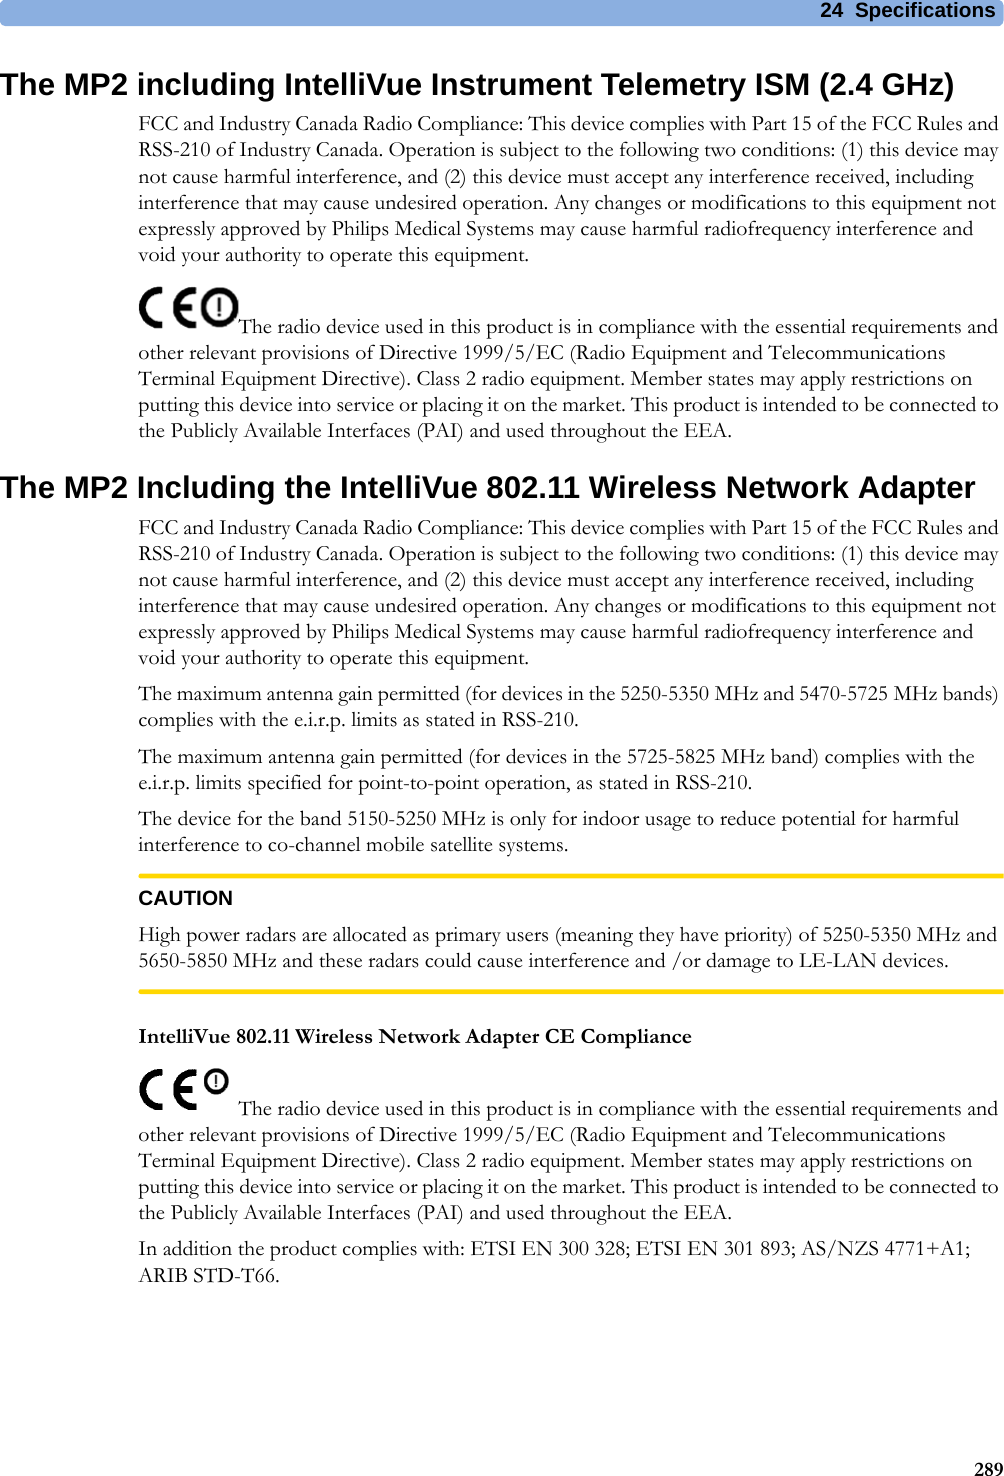 24 Specifications289The MP2 including IntelliVue Instrument Telemetry ISM (2.4 GHz)FCC and Industry Canada Radio Compliance: This device complies with Part 15 of the FCC Rules and RSS-210 of Industry Canada. Operation is subject to the following two conditions: (1) this device may not cause harmful interference, and (2) this device must accept any interference received, including interference that may cause undesired operation. Any changes or modifications to this equipment not expressly approved by Philips Medical Systems may cause harmful radiofrequency interference and void your authority to operate this equipment.The radio device used in this product is in compliance with the essential requirements and other relevant provisions of Directive 1999/5/EC (Radio Equipment and Telecommunications Terminal Equipment Directive). Class 2 radio equipment. Member states may apply restrictions on putting this device into service or placing it on the market. This product is intended to be connected to the Publicly Available Interfaces (PAI) and used throughout the EEA.The MP2 Including the IntelliVue 802.11 Wireless Network AdapterFCC and Industry Canada Radio Compliance: This device complies with Part 15 of the FCC Rules and RSS-210 of Industry Canada. Operation is subject to the following two conditions: (1) this device may not cause harmful interference, and (2) this device must accept any interference received, including interference that may cause undesired operation. Any changes or modifications to this equipment not expressly approved by Philips Medical Systems may cause harmful radiofrequency interference and void your authority to operate this equipment.The maximum antenna gain permitted (for devices in the 5250-5350 MHz and 5470-5725 MHz bands) complies with the e.i.r.p. limits as stated in RSS-210.The maximum antenna gain permitted (for devices in the 5725-5825 MHz band) complies with the e.i.r.p. limits specified for point-to-point operation, as stated in RSS-210.The device for the band 5150-5250 MHz is only for indoor usage to reduce potential for harmful interference to co-channel mobile satellite systems.CAUTIONHigh power radars are allocated as primary users (meaning they have priority) of 5250-5350 MHz and 5650-5850 MHz and these radars could cause interference and /or damage to LE-LAN devices.IntelliVue 802.11 Wireless Network Adapter CE ComplianceThe radio device used in this product is in compliance with the essential requirements and other relevant provisions of Directive 1999/5/EC (Radio Equipment and Telecommunications Terminal Equipment Directive). Class 2 radio equipment. Member states may apply restrictions on putting this device into service or placing it on the market. This product is intended to be connected to the Publicly Available Interfaces (PAI) and used throughout the EEA.In addition the product complies with: ETSI EN 300 328; ETSI EN 301 893; AS/NZS 4771+A1; ARIB STD-T66.